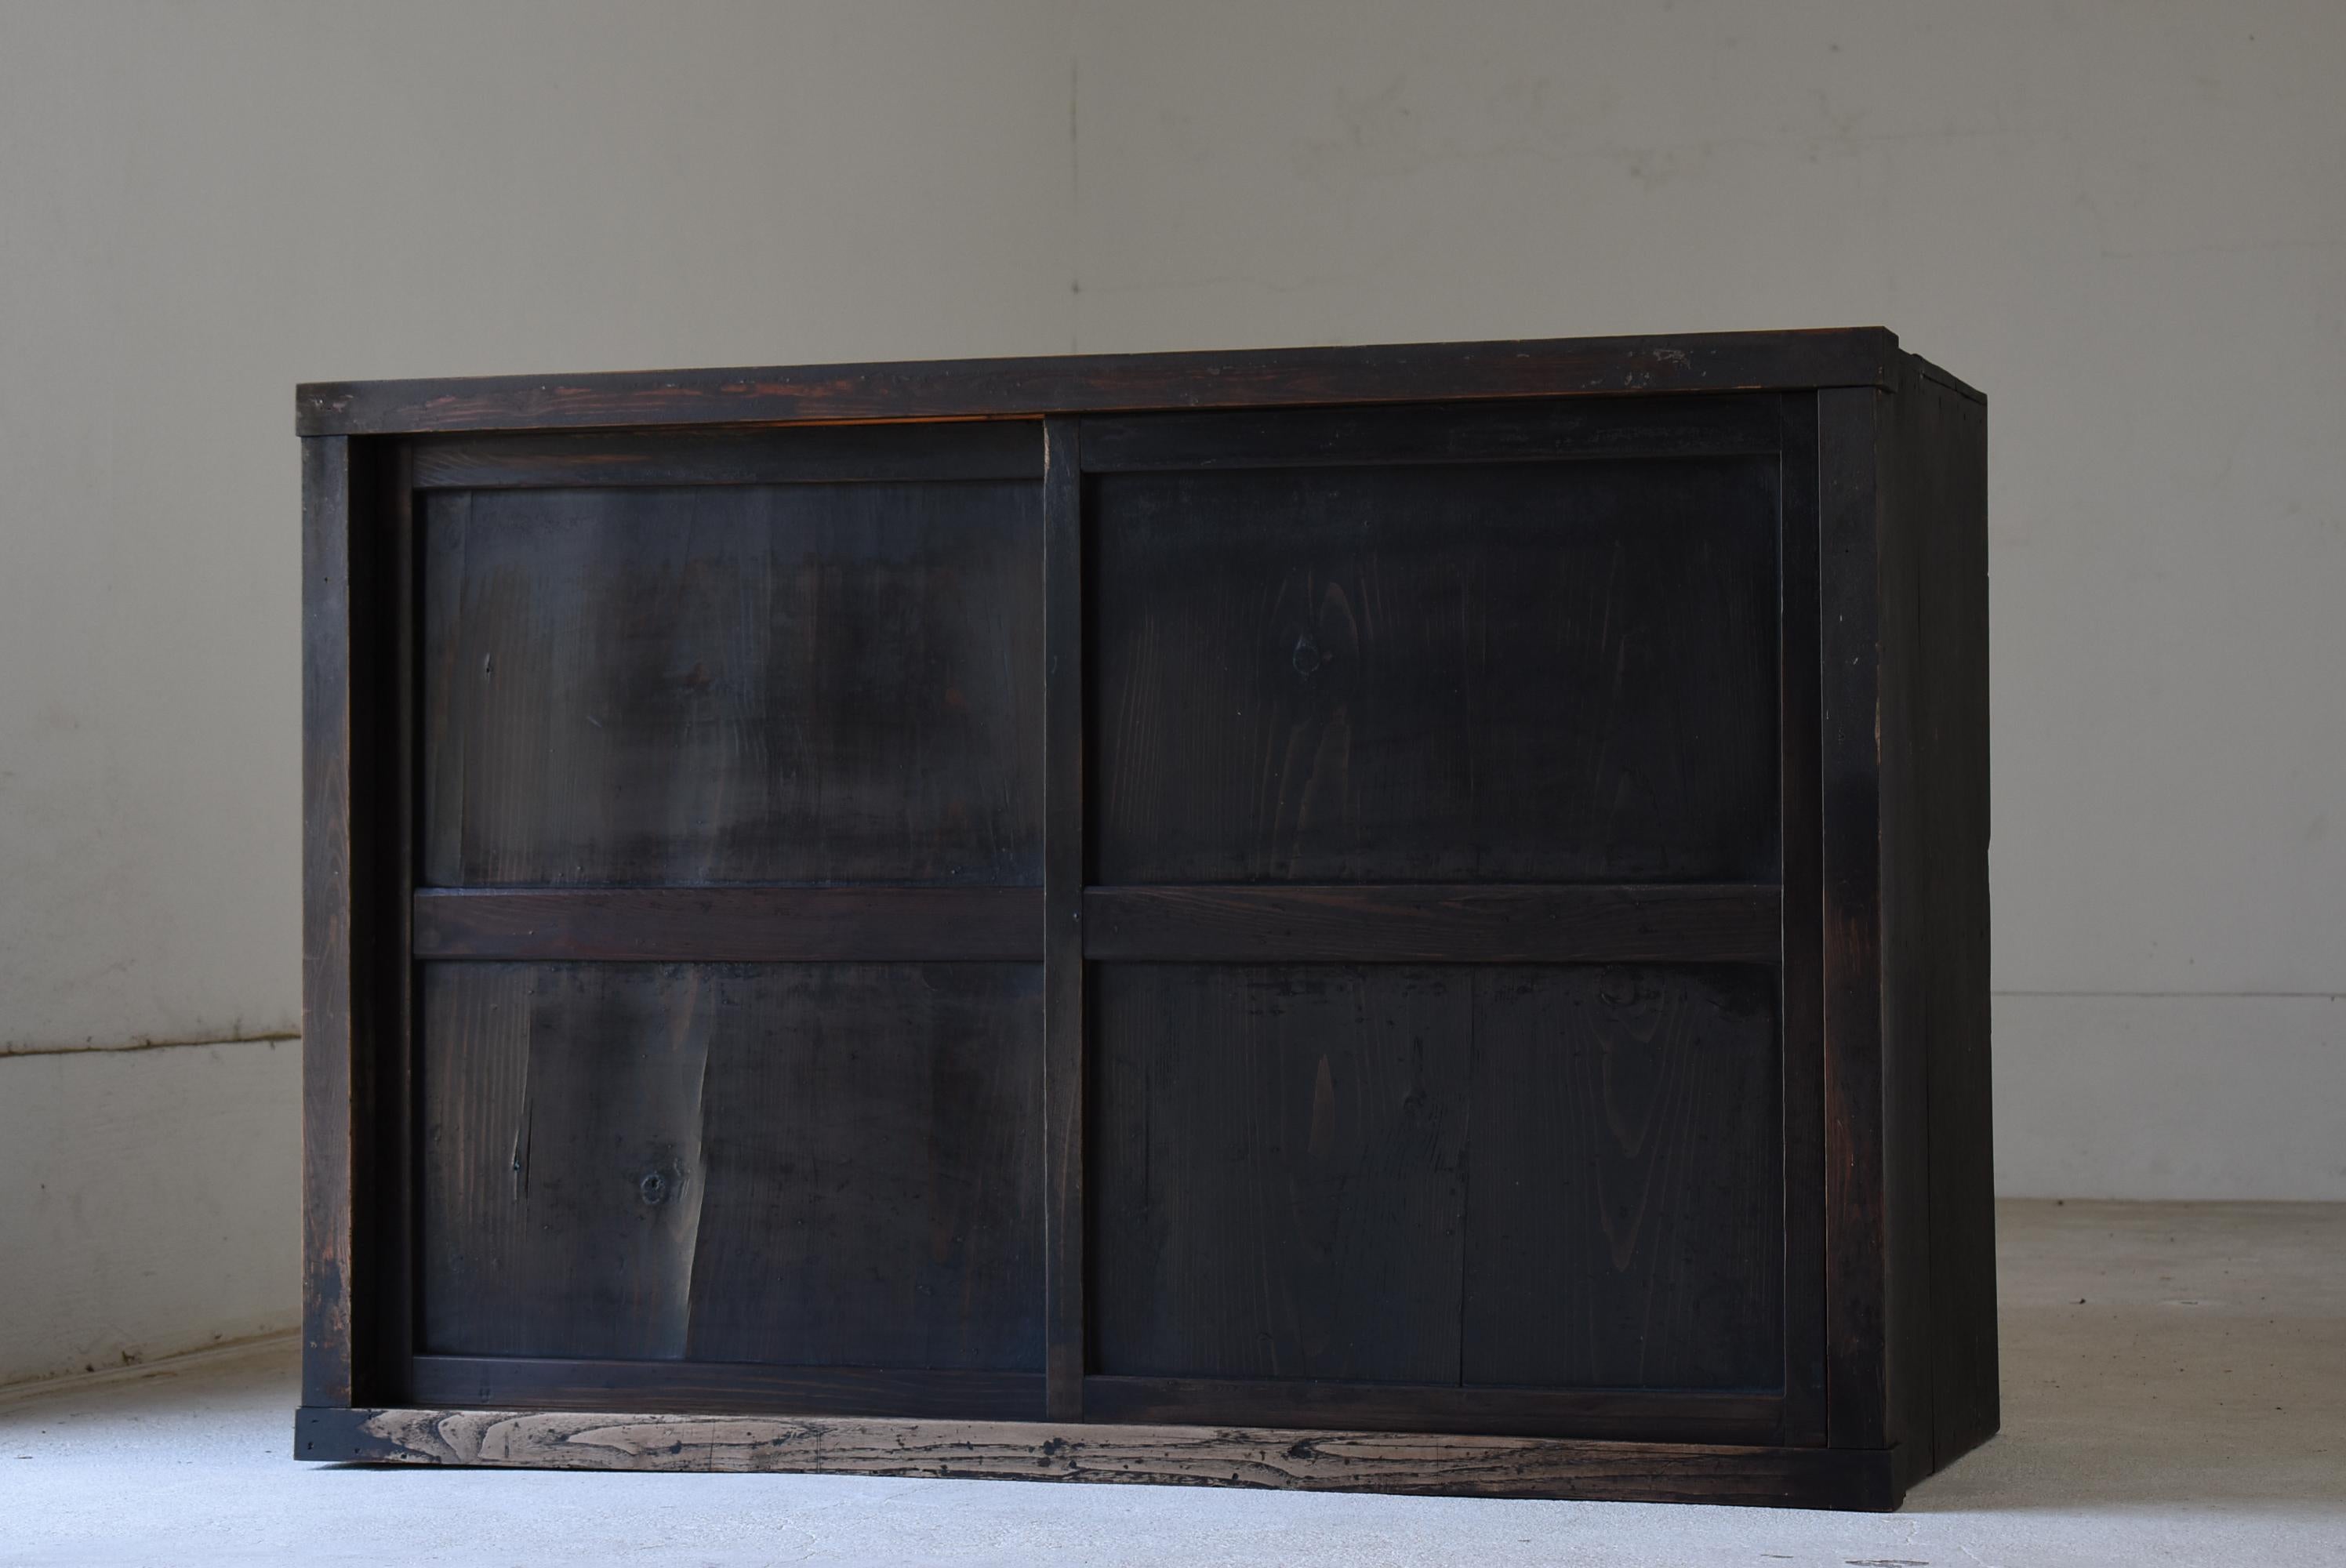 Very old Japanese large Tansu.
Furniture made in the Meiji era (1860s-1900s).
It is made of cedar wood.

The uniquely Japanese design is simple and rustic.
There is no useless design, it is ultimate simplicity.
The jet-black color is also very